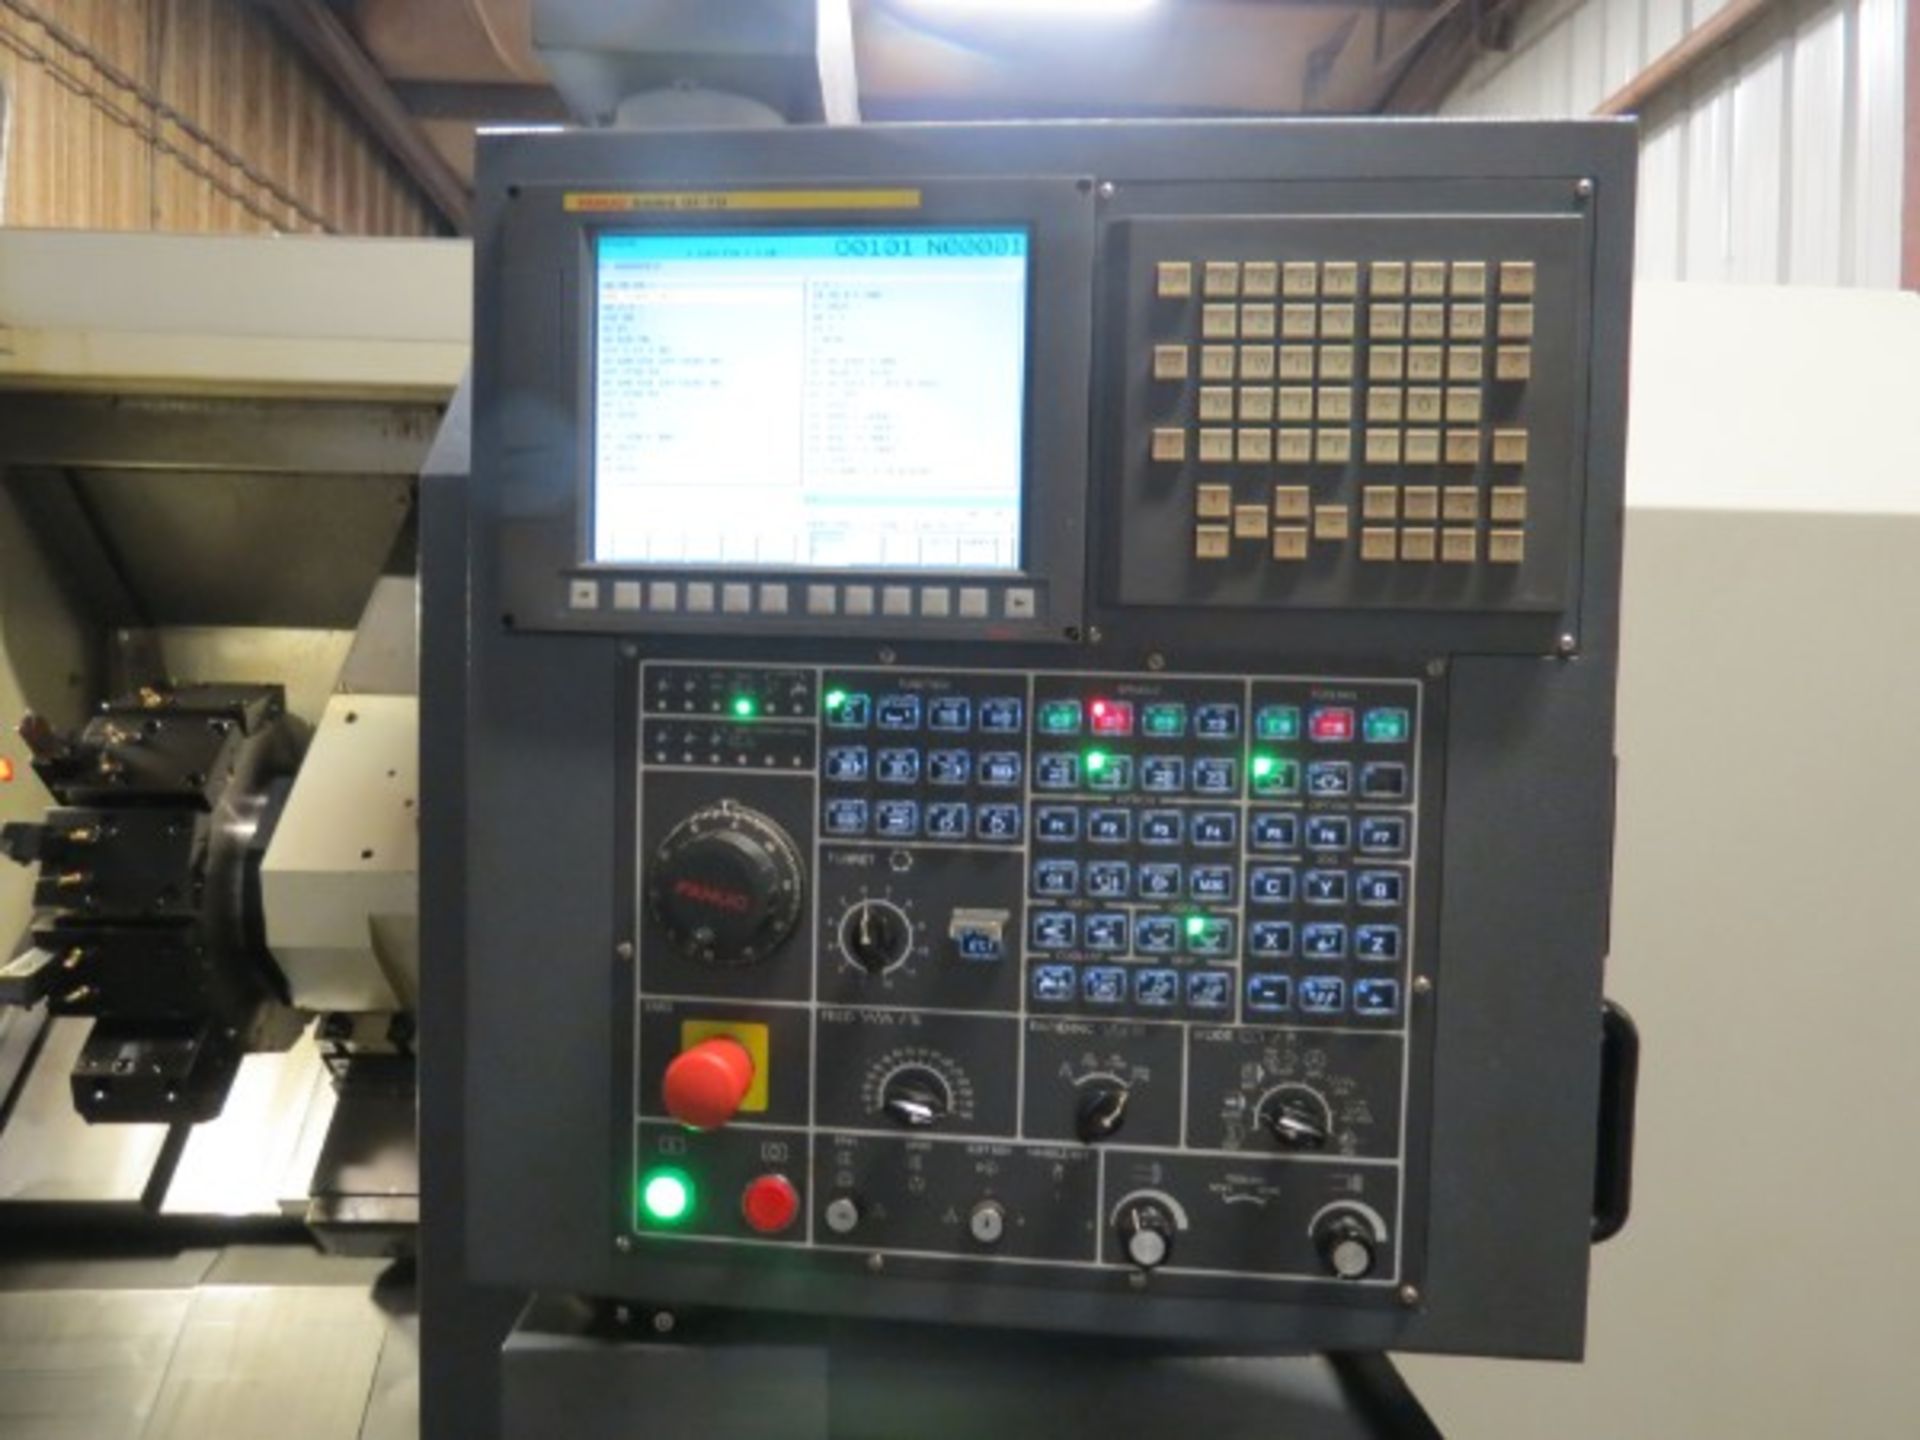 Leadwell T-7 CNC Turning Center Fanuc 0i-TD, 20 HP, 4500 RPM, 8" Chuck, X-Axis 7.9", Y-Axis 23.6", - Image 6 of 7